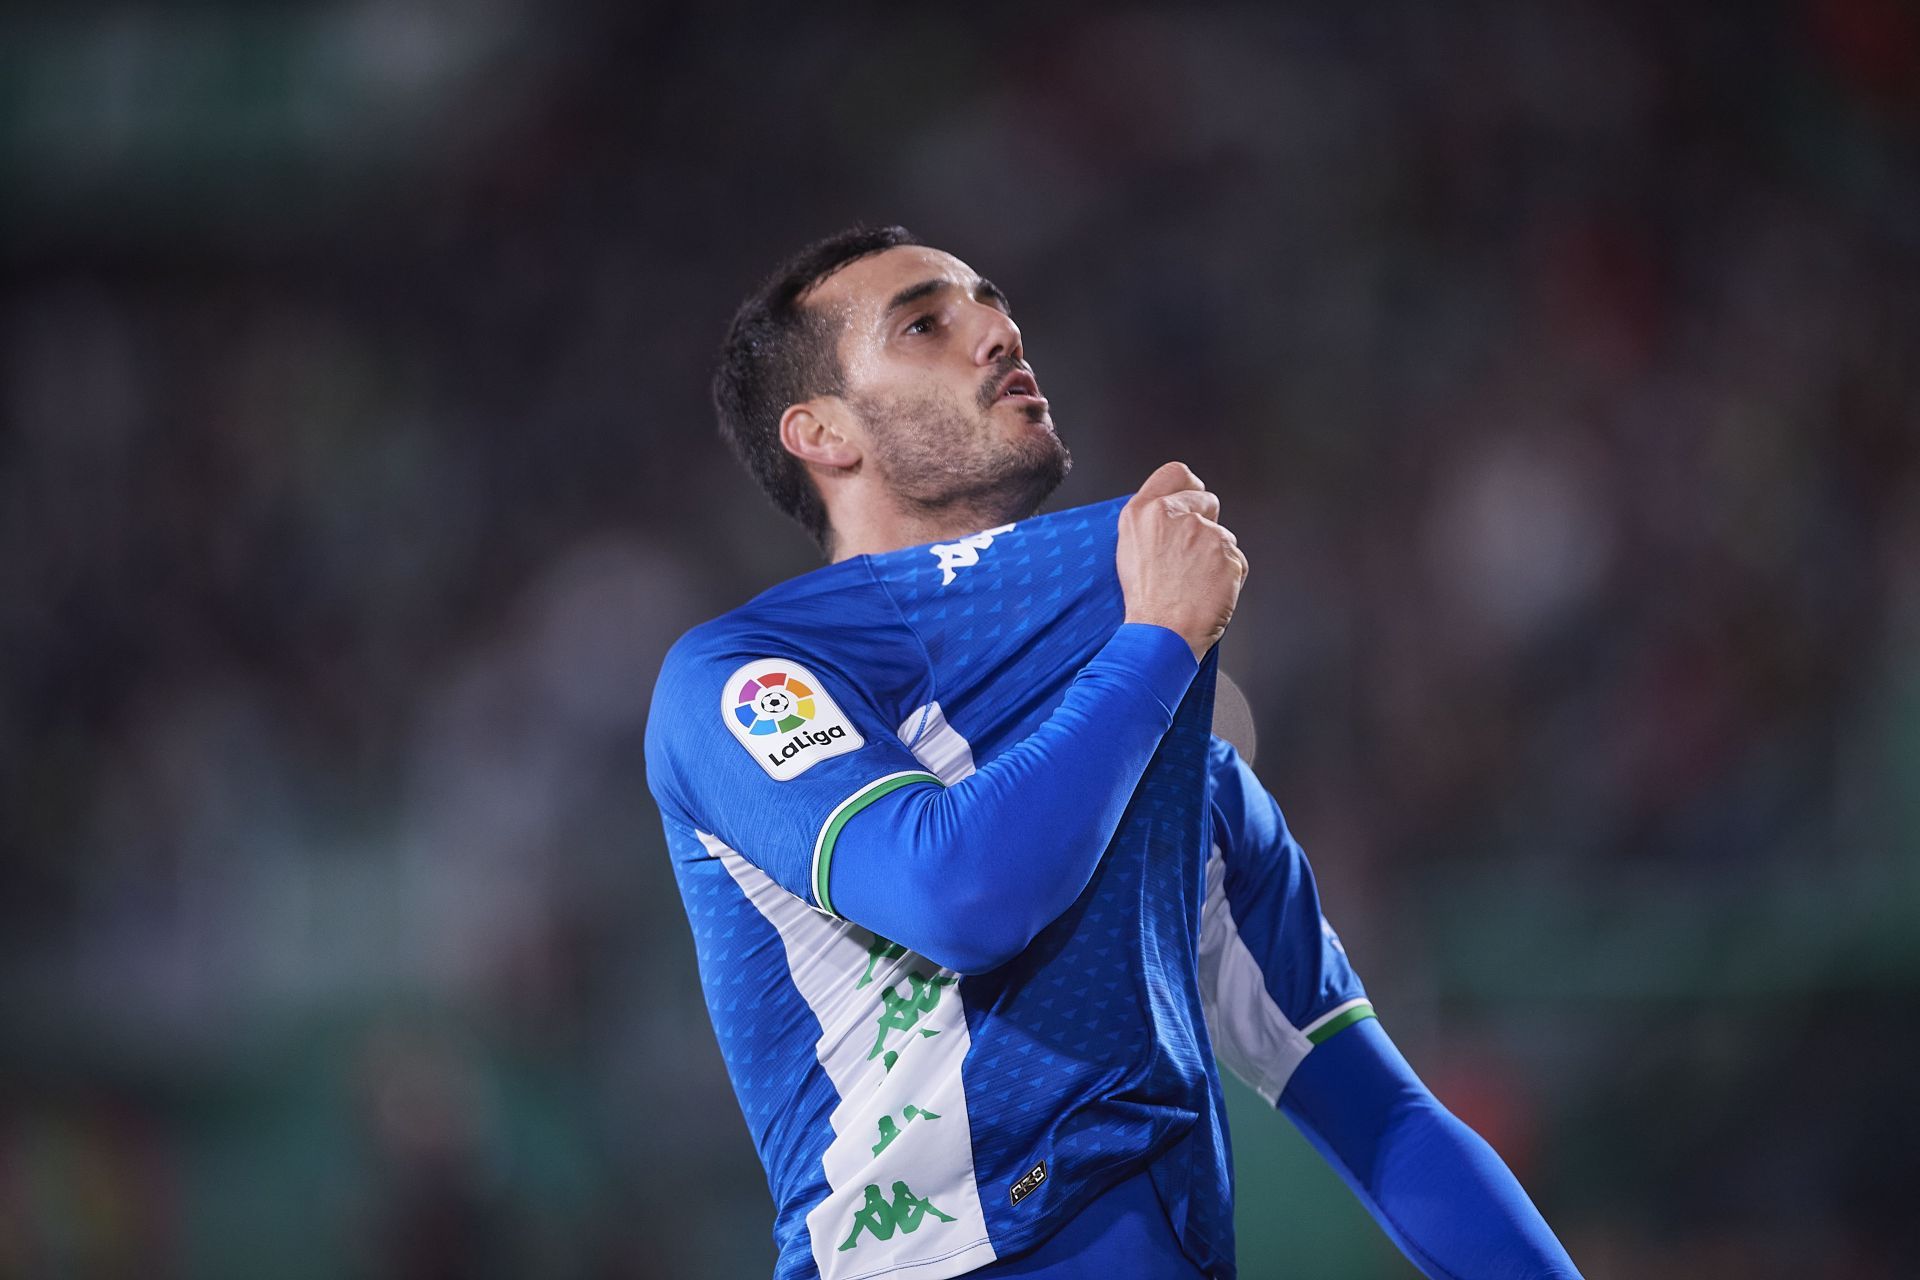 Juanmi went into the winter break on the back of a five-game scoring streak